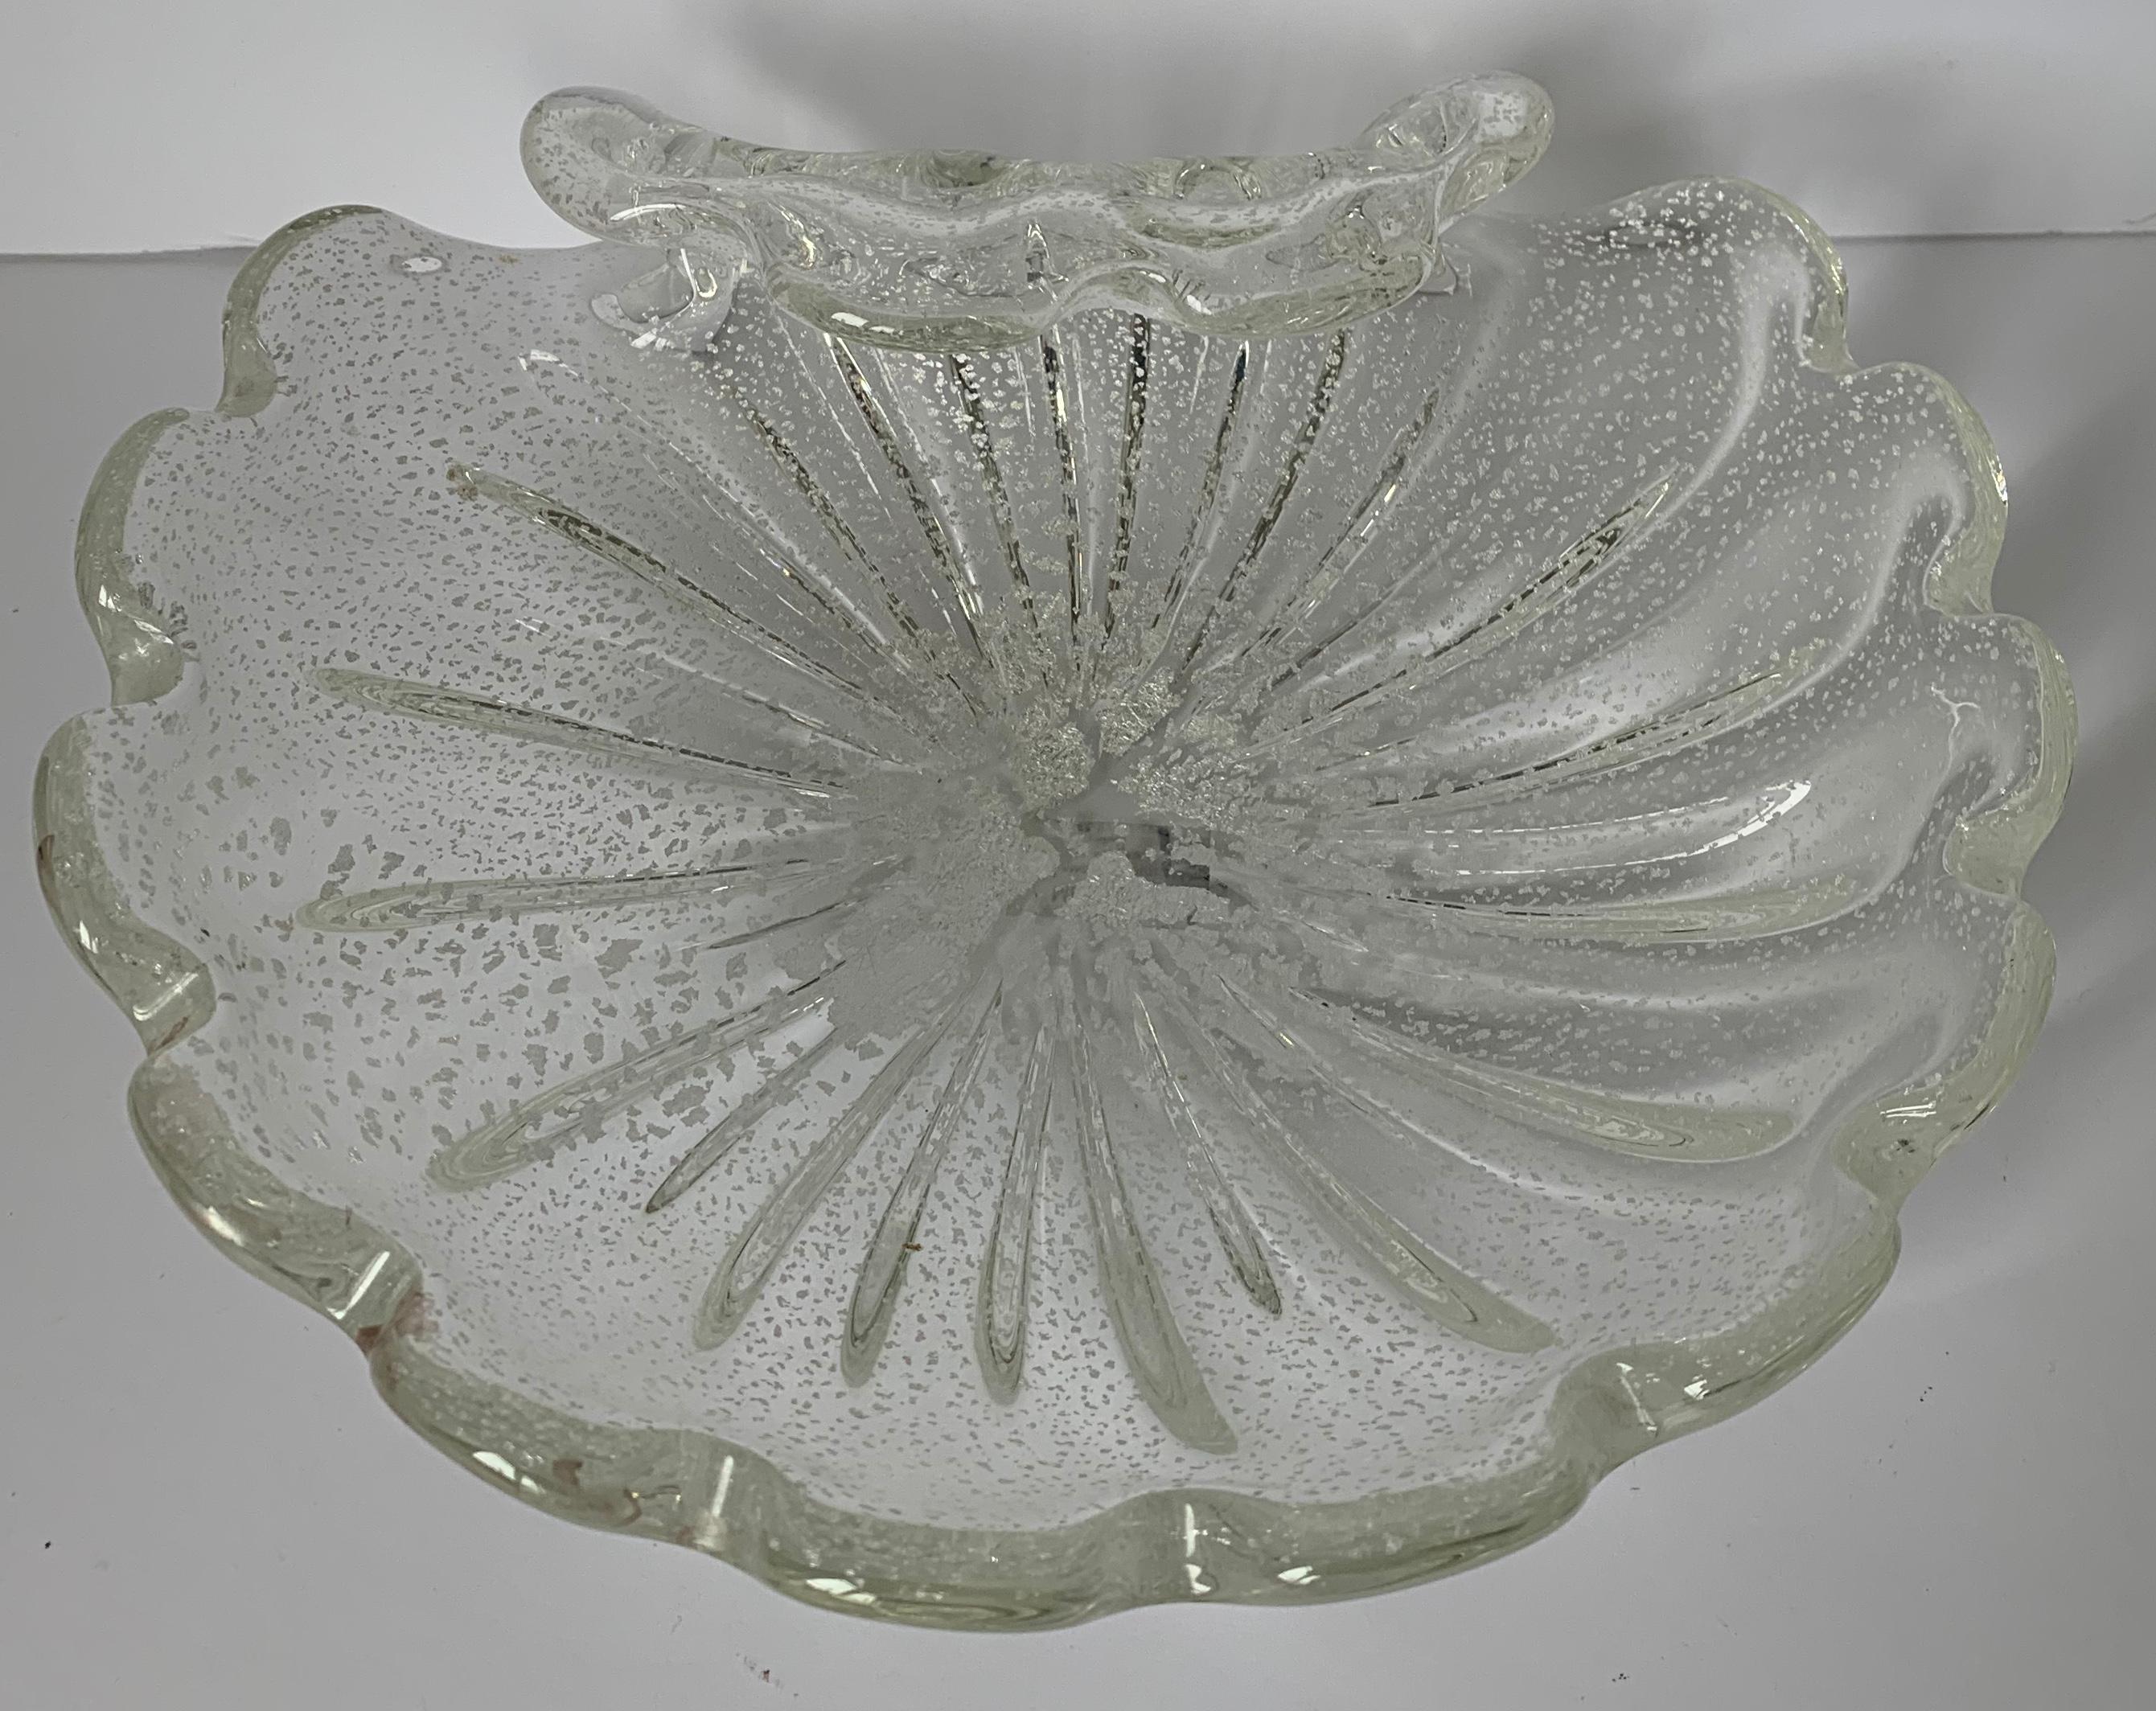 Pair of large Murano clamshell bowls or ashtrays. Clear ribbed glass with all-over silver flecking. No makers mark.